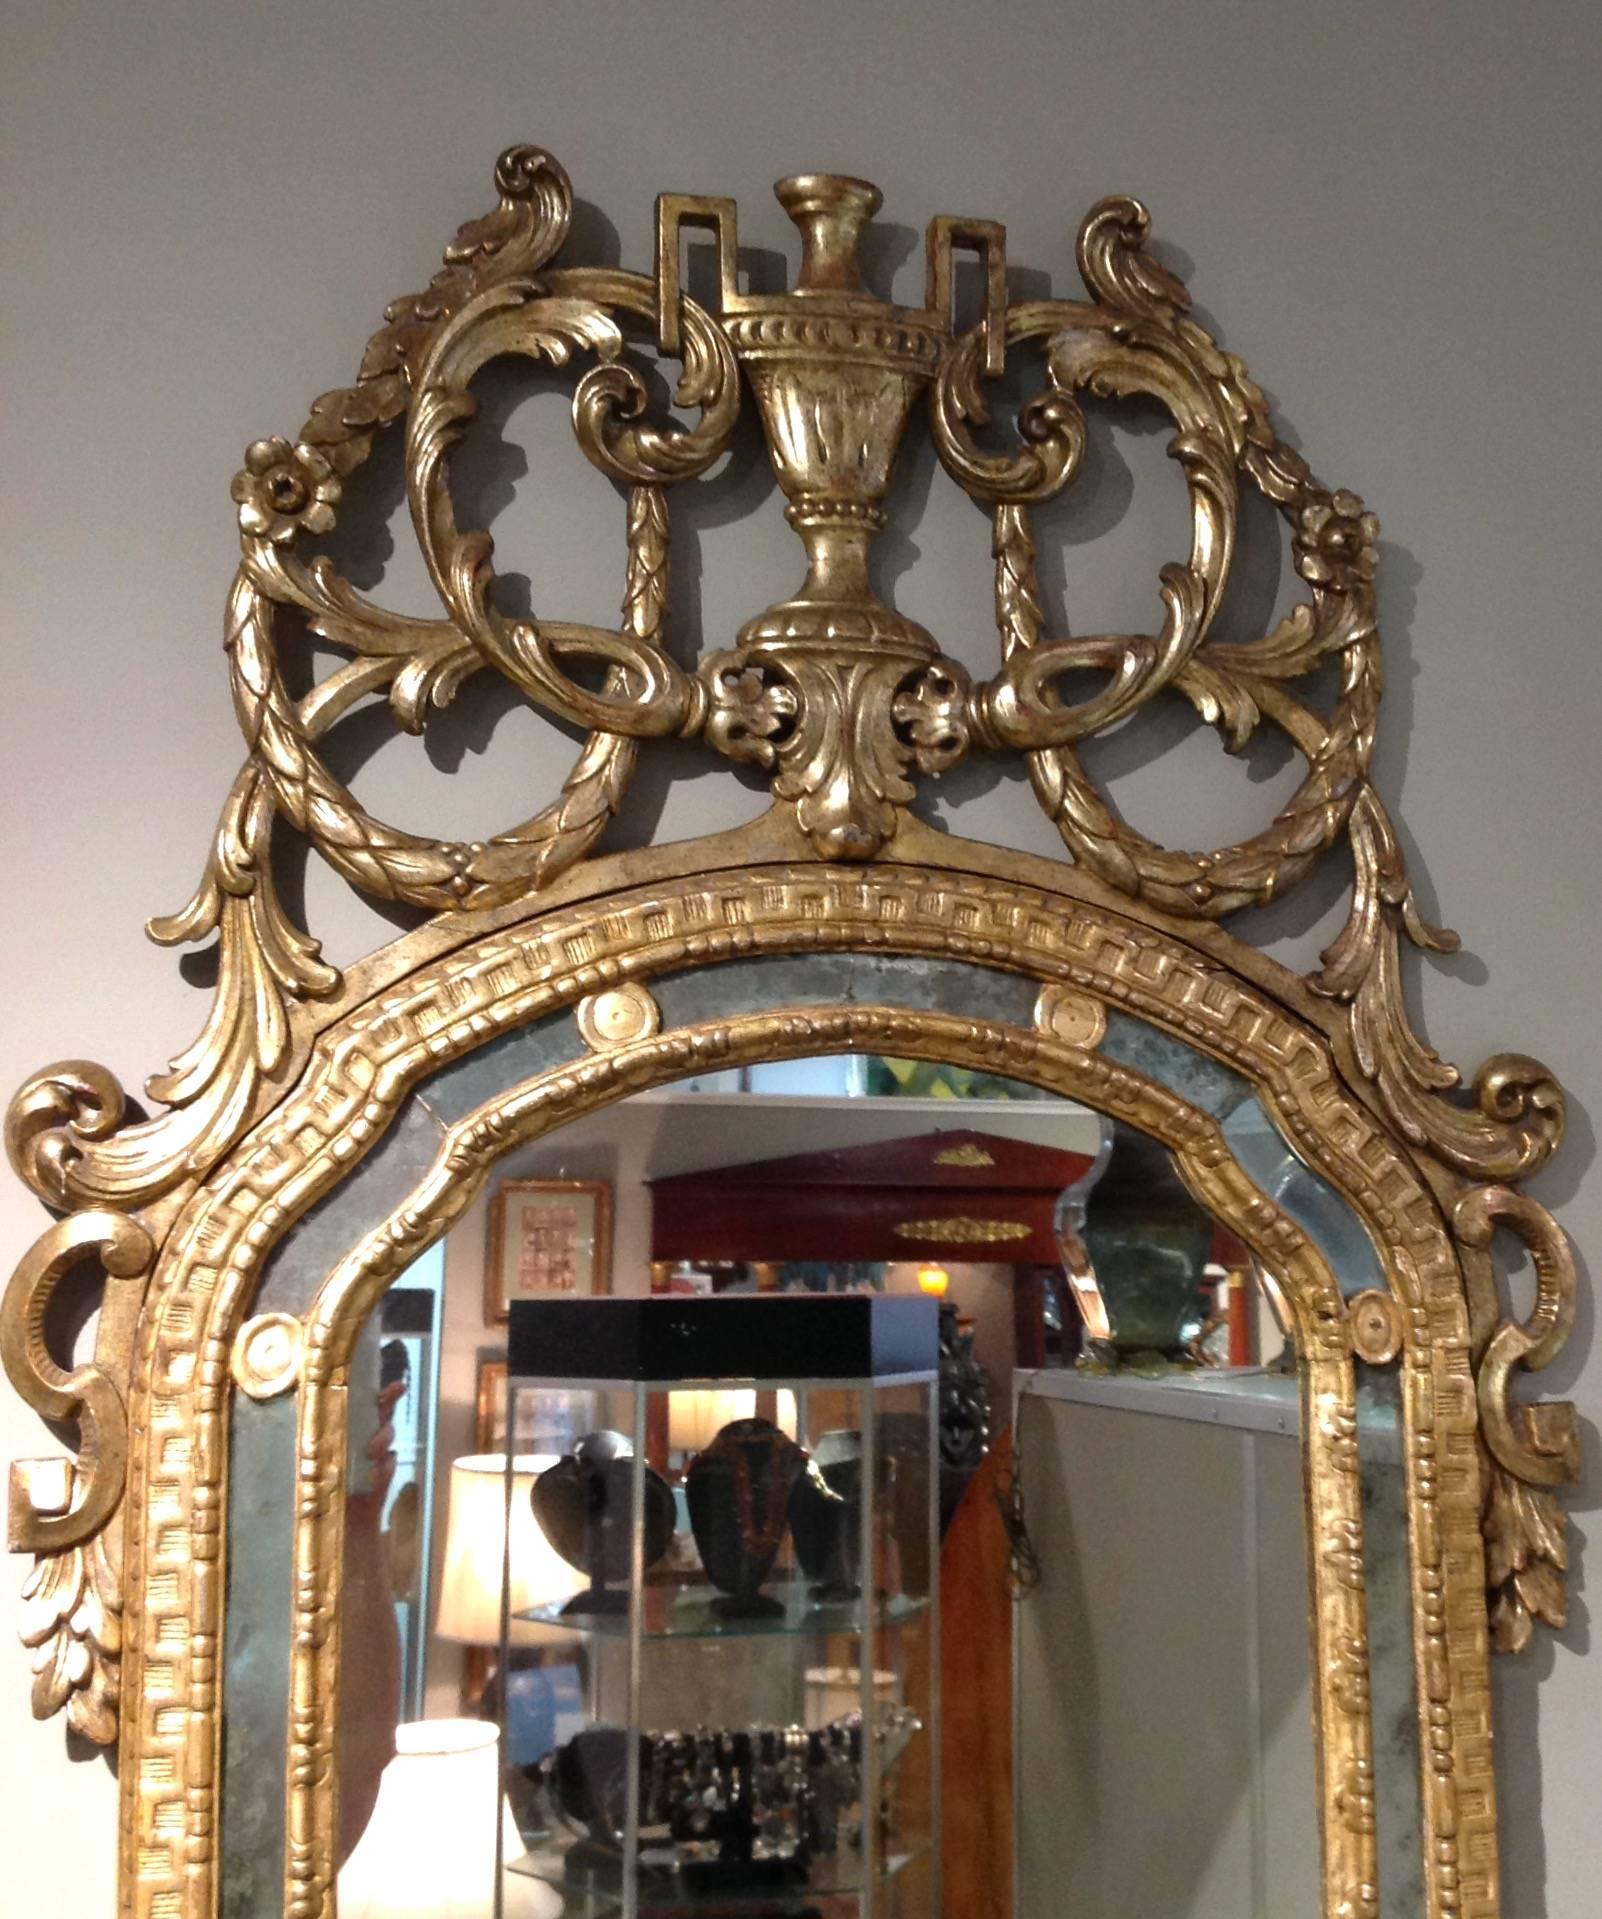 Antique Continental openwork carved wood and gilt mirror. Circa late 18th or early 19th century.